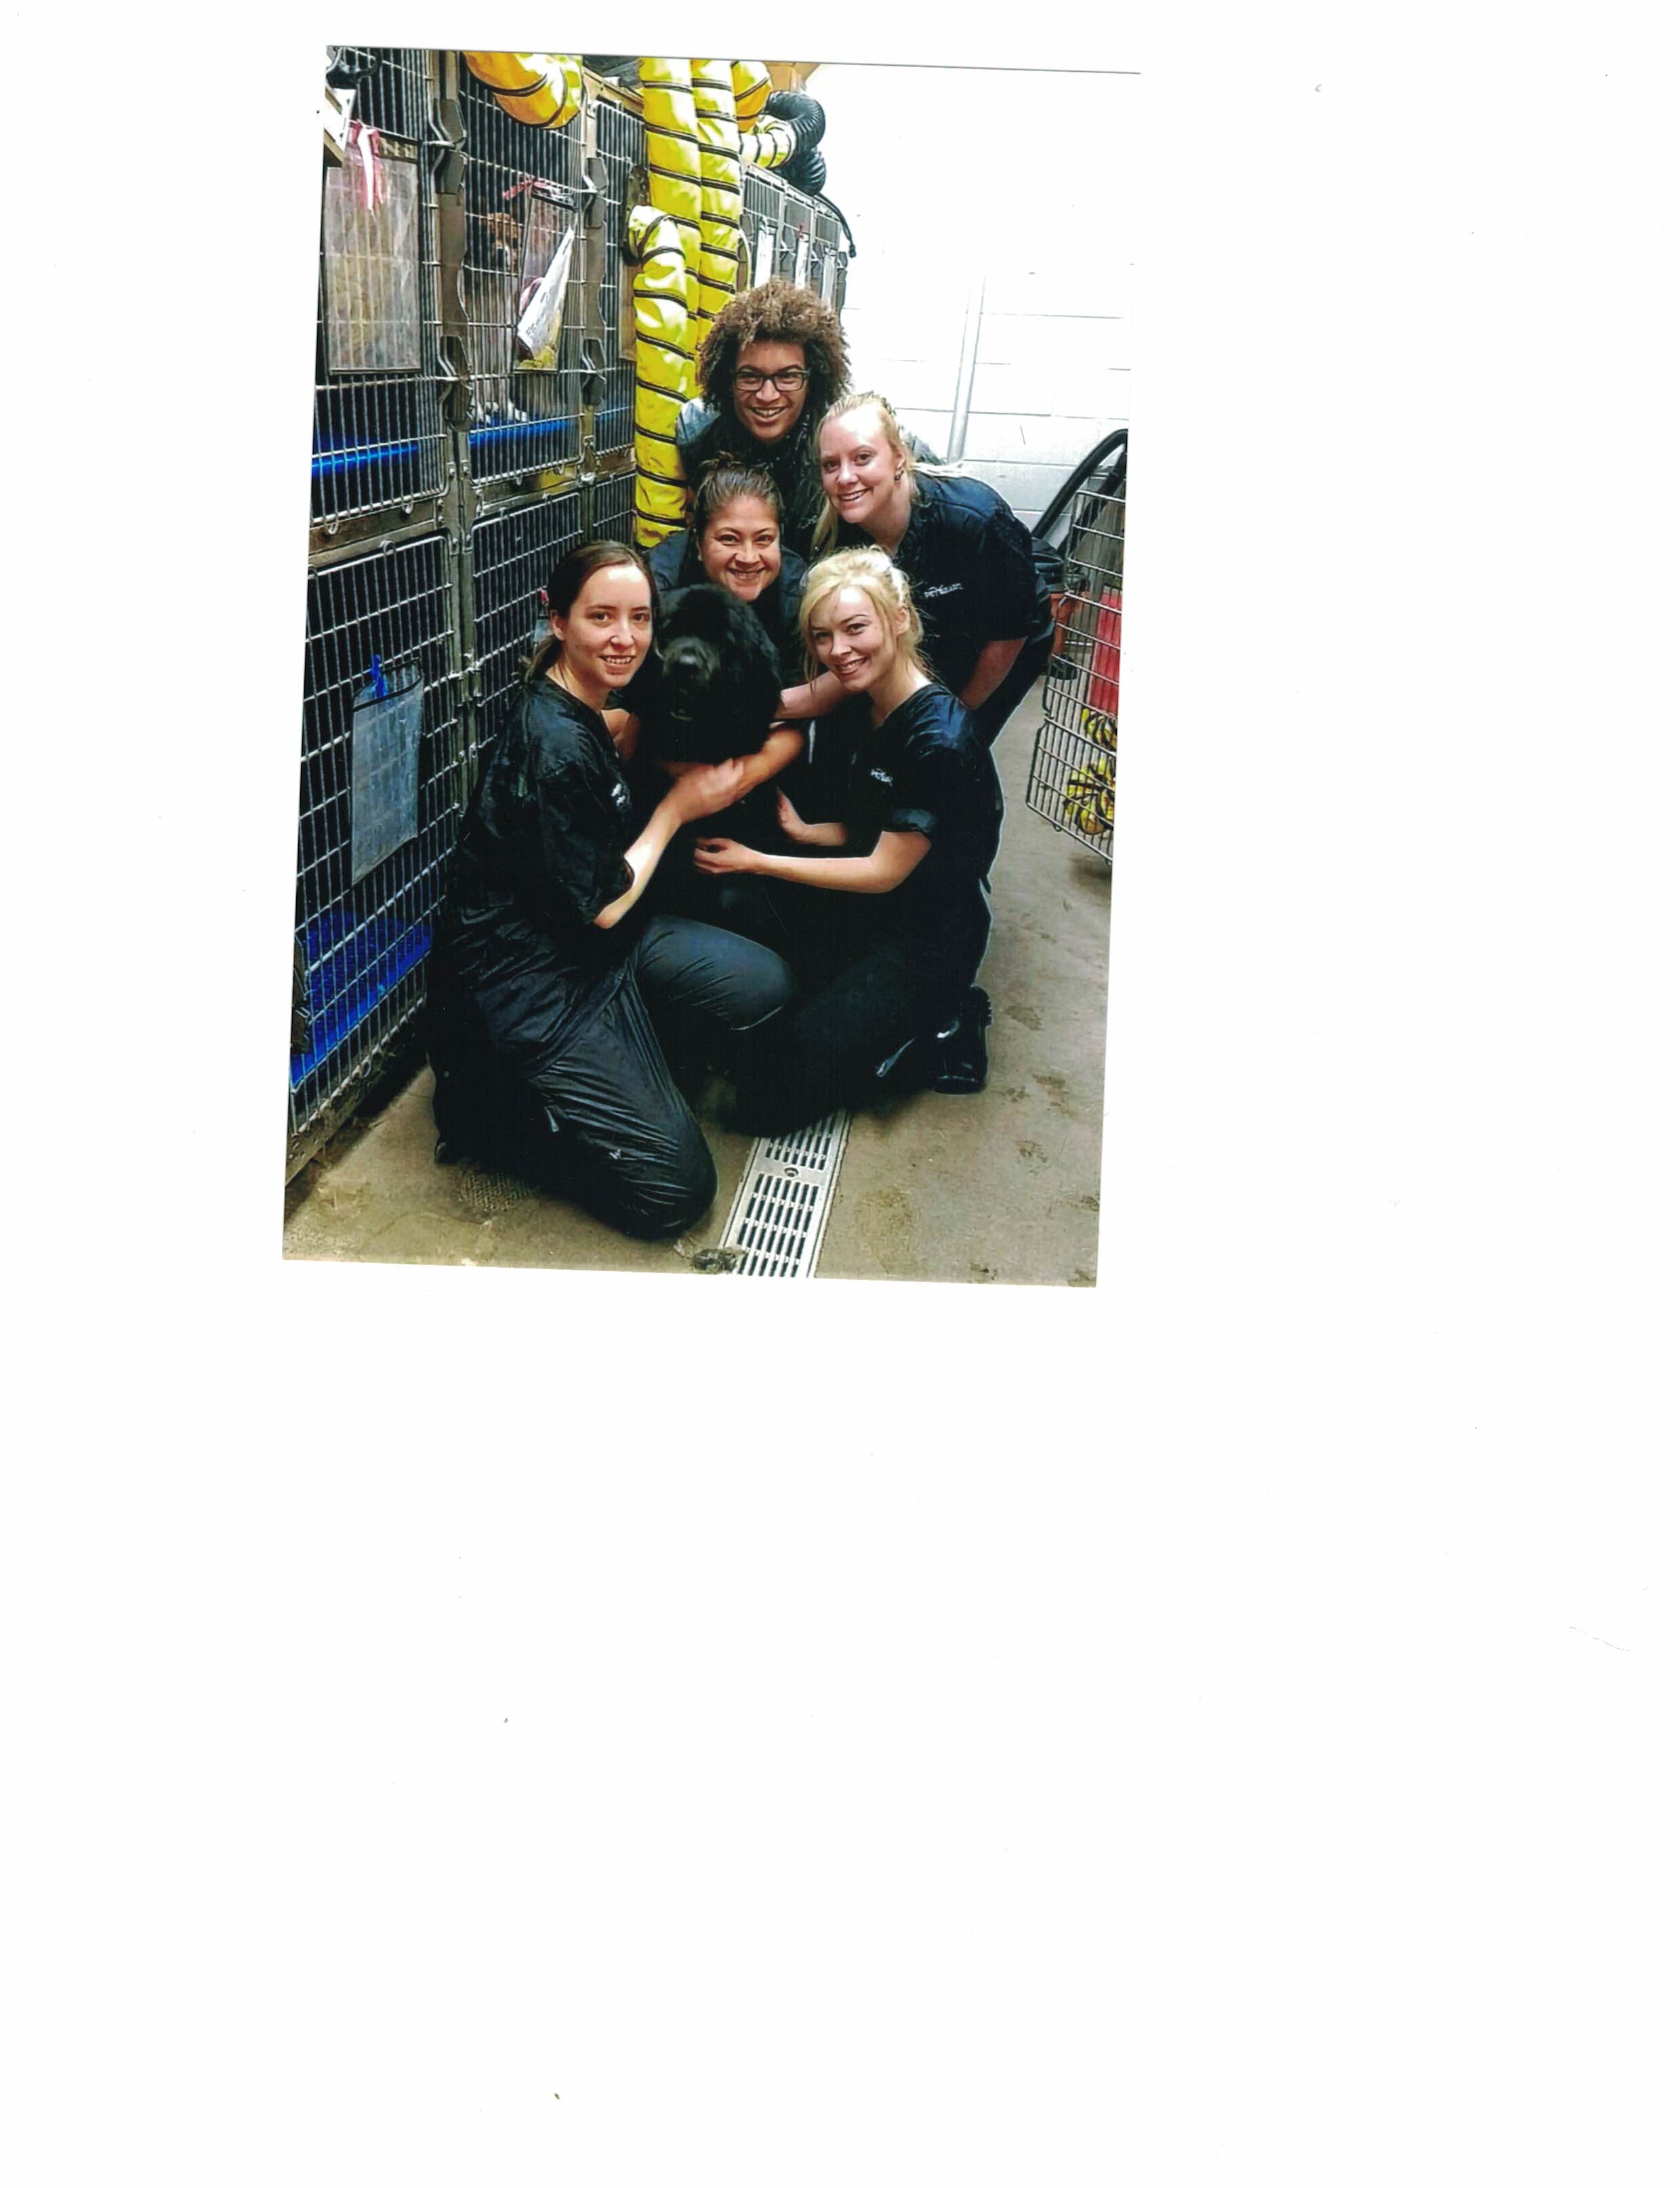 Jack and grooming ladies from pet smart